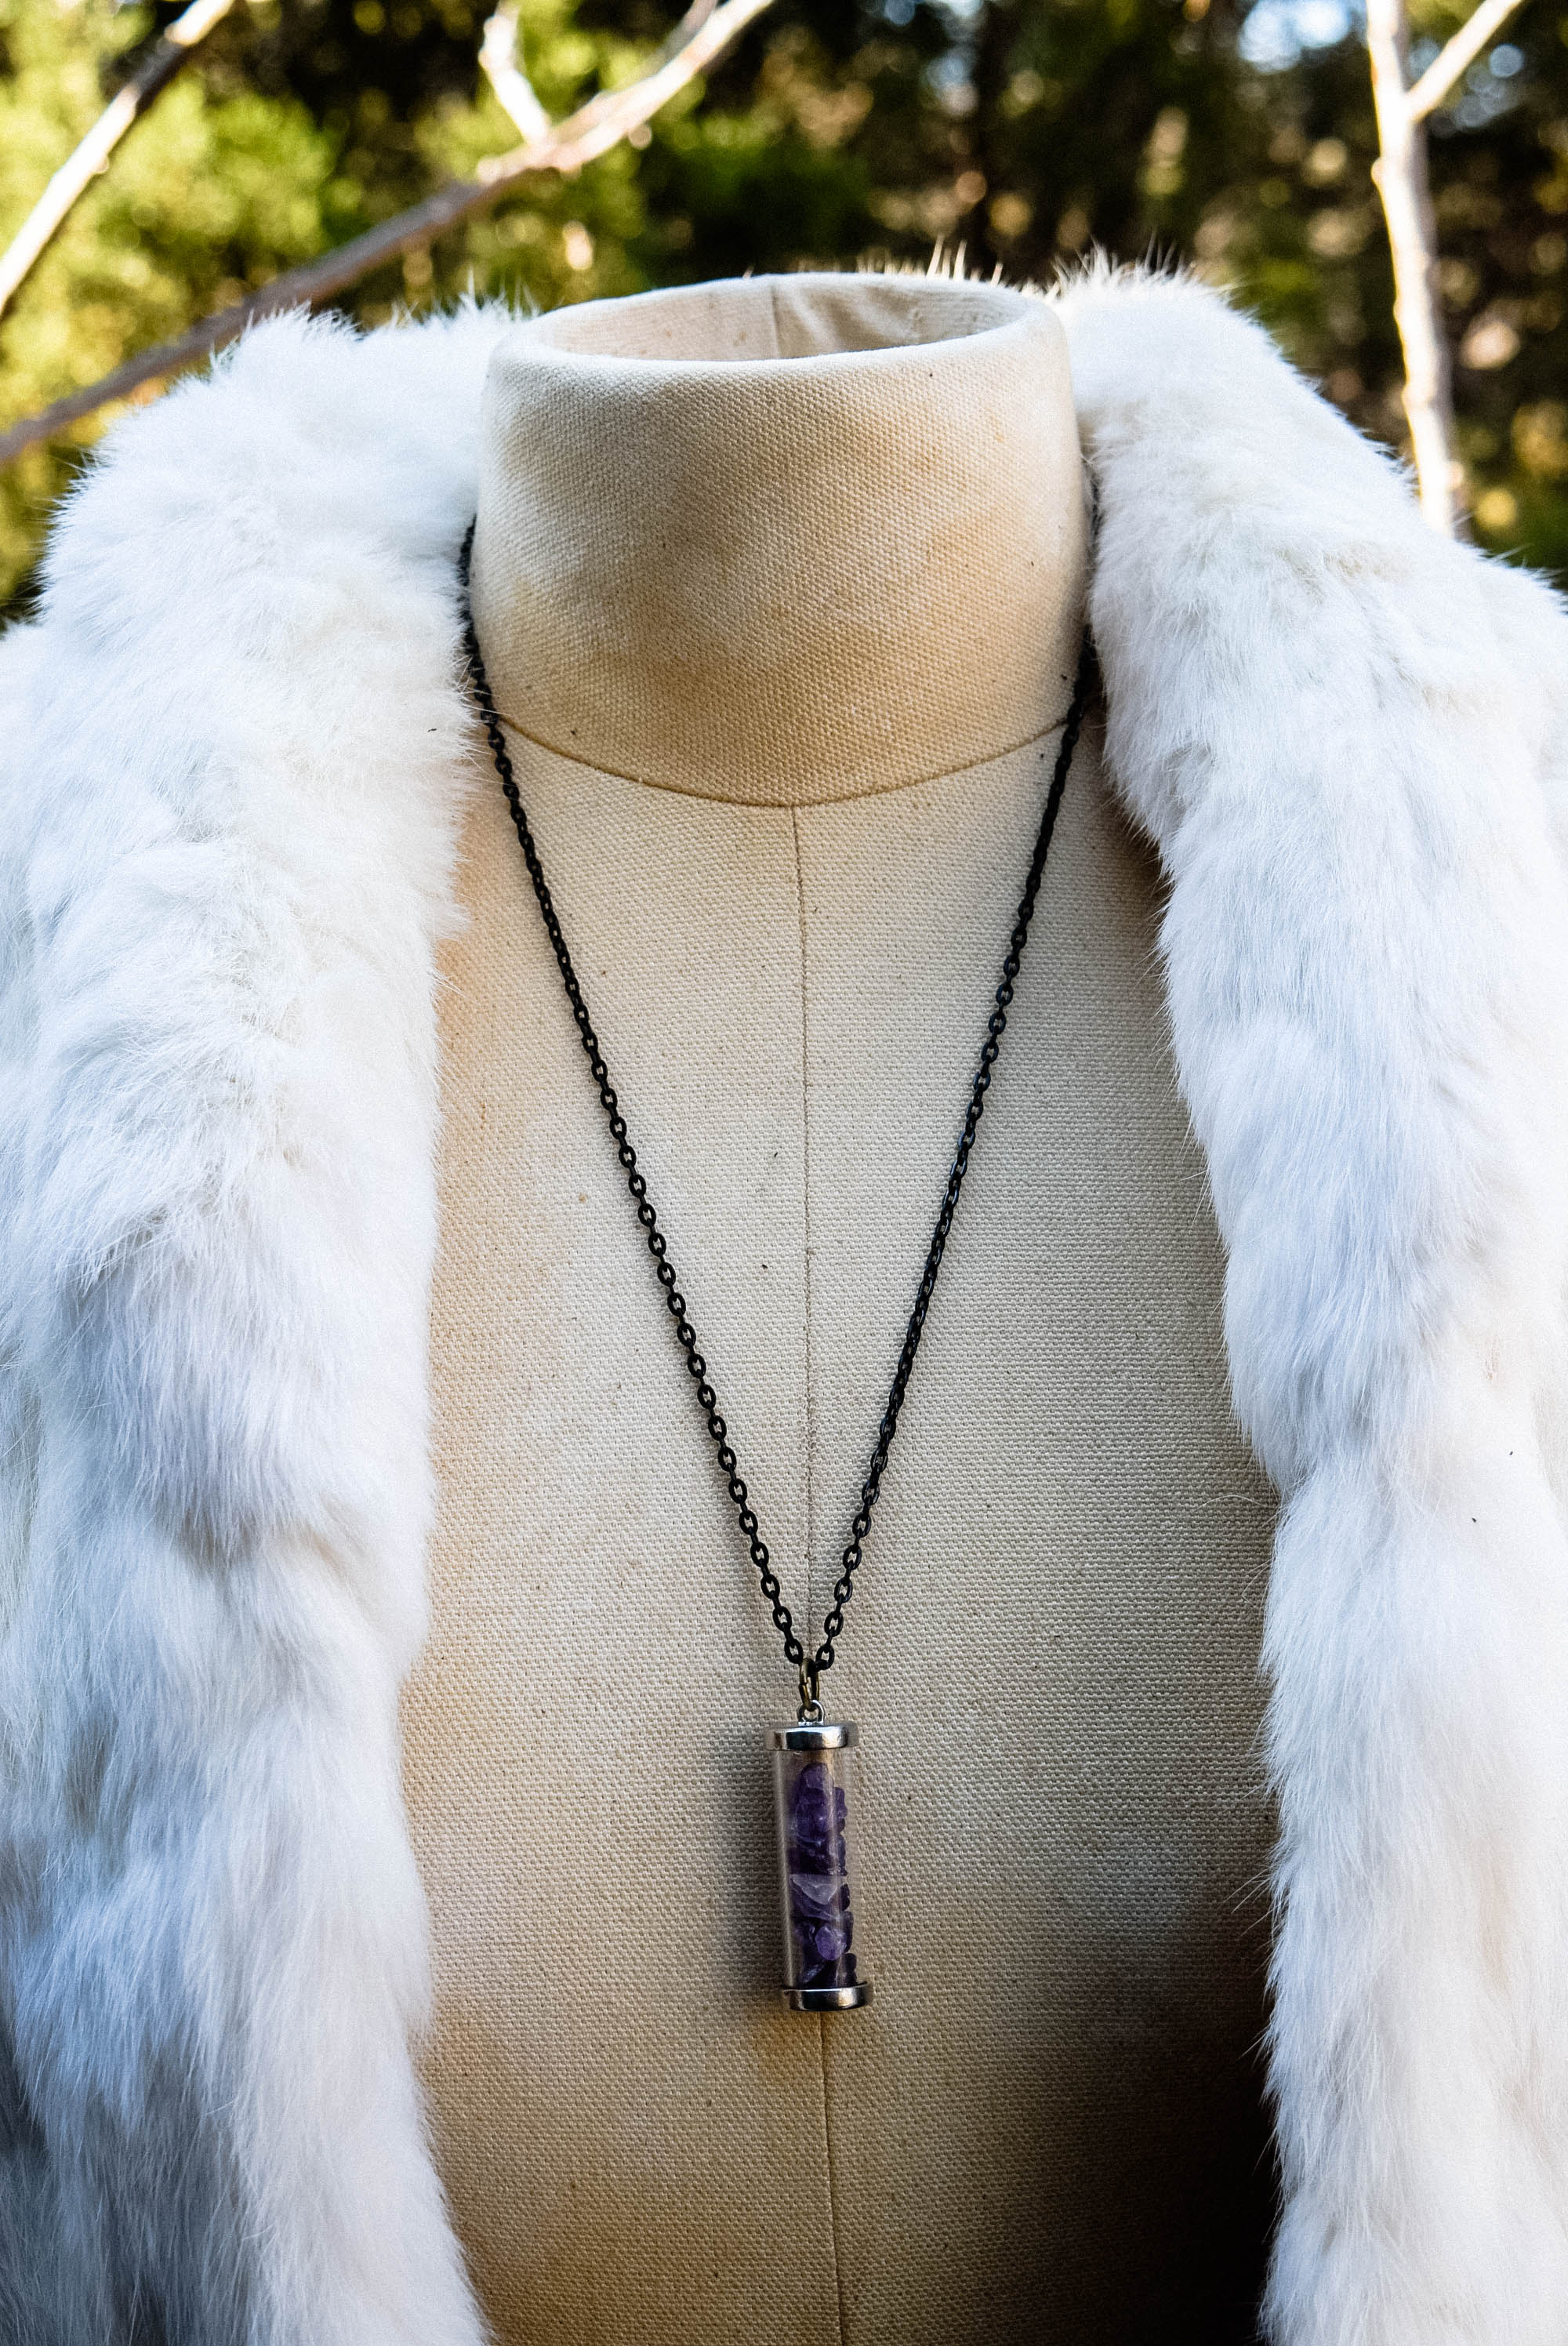 Amethyst Necklace for Spiritual Awareness, Intuition and Enhanced Psychic Abilities